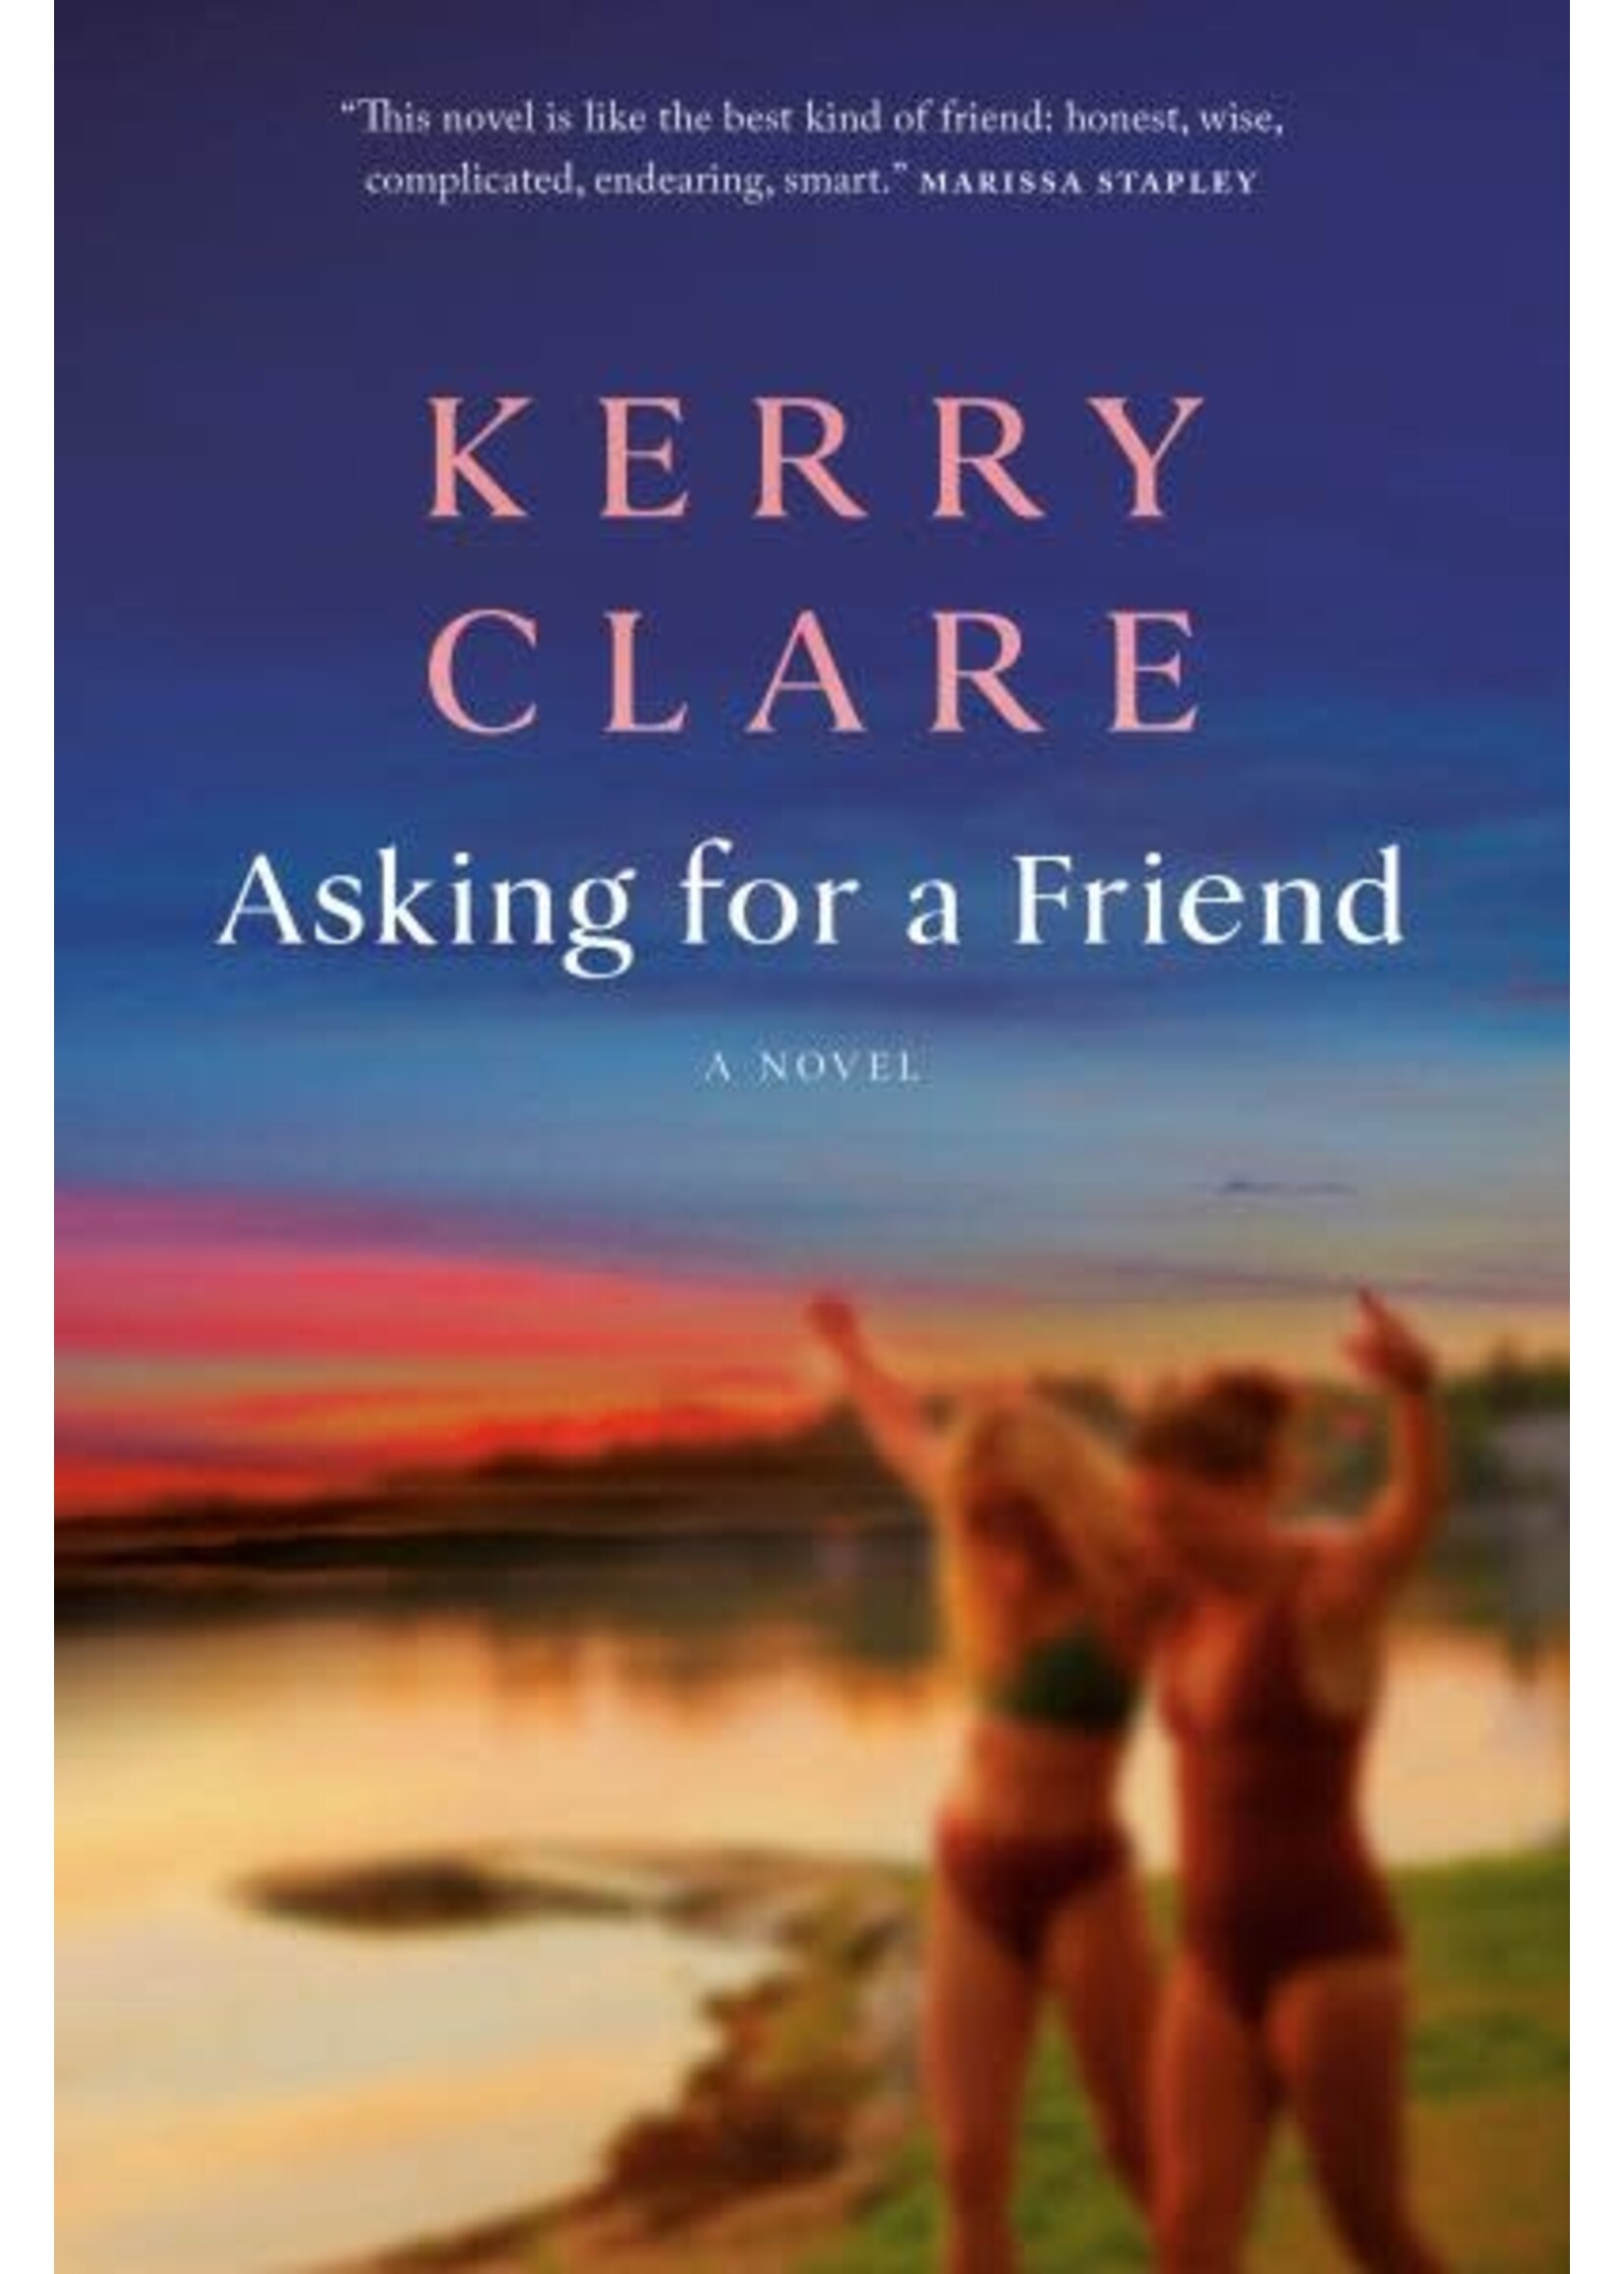 Asking for a Friend by Kerry Clare